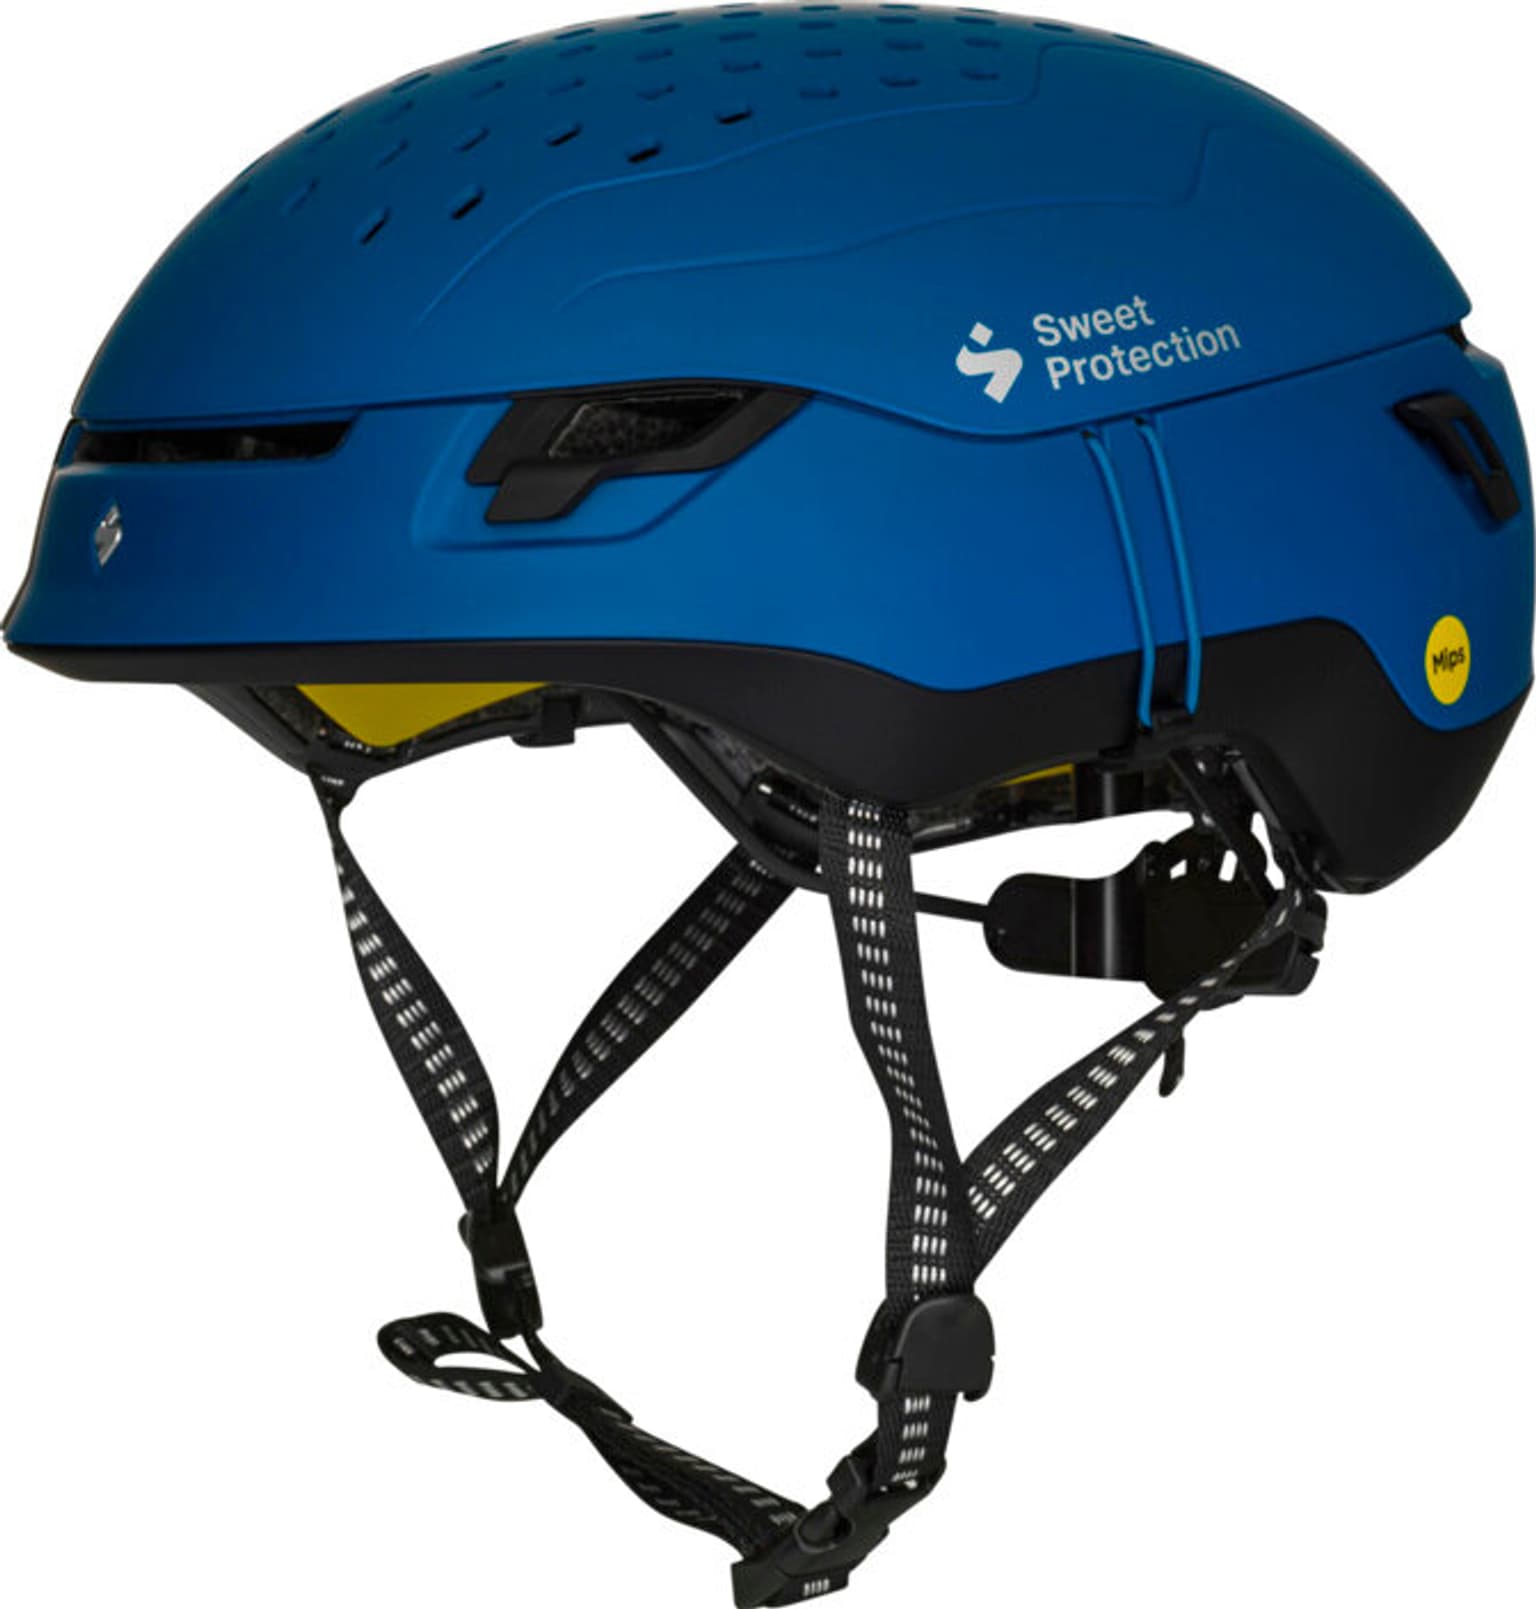 Sweet Protection Sweet Protection Ascender Mips Casco da sci blu 1